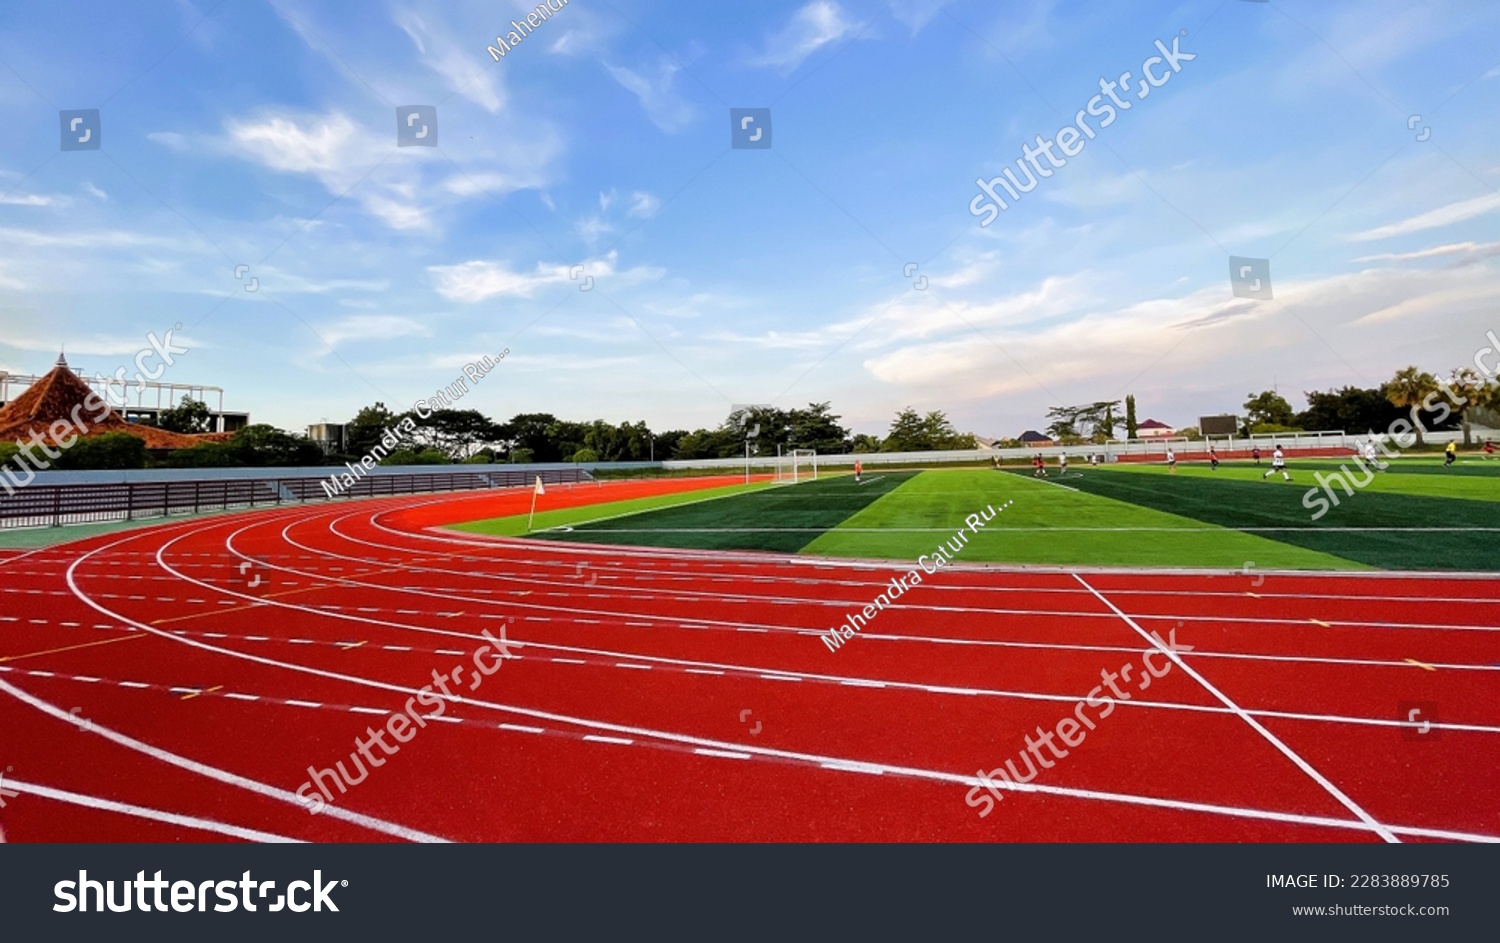 The running track inside a football stadium is usually a circular pathway surrounding the field. #2283889785